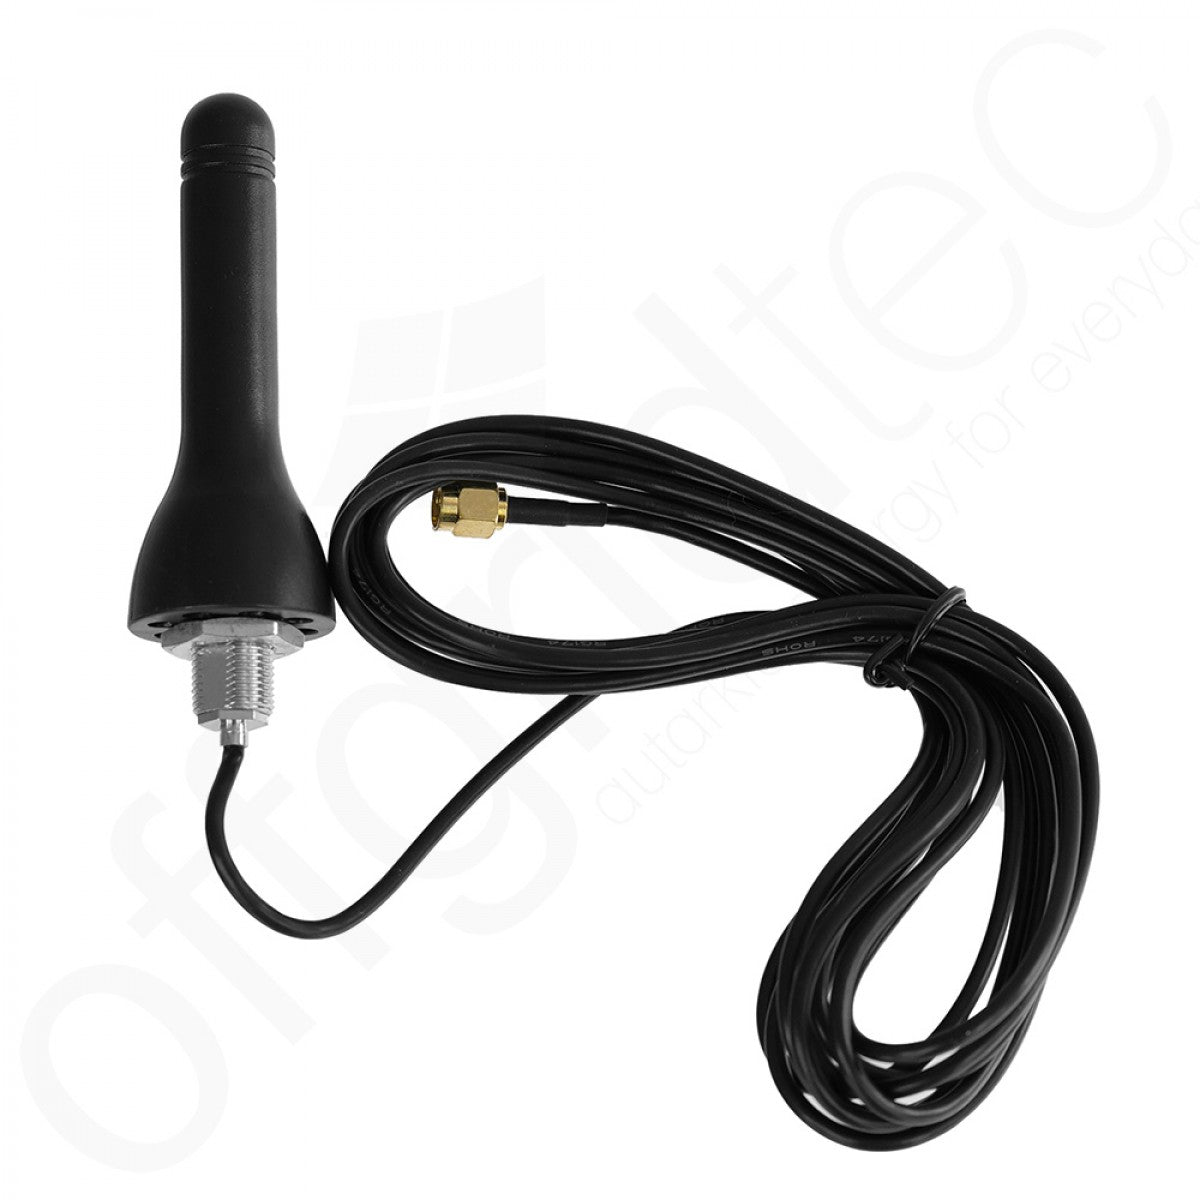 Outdoor 2G and 3G GSM Antenna for GX GSM